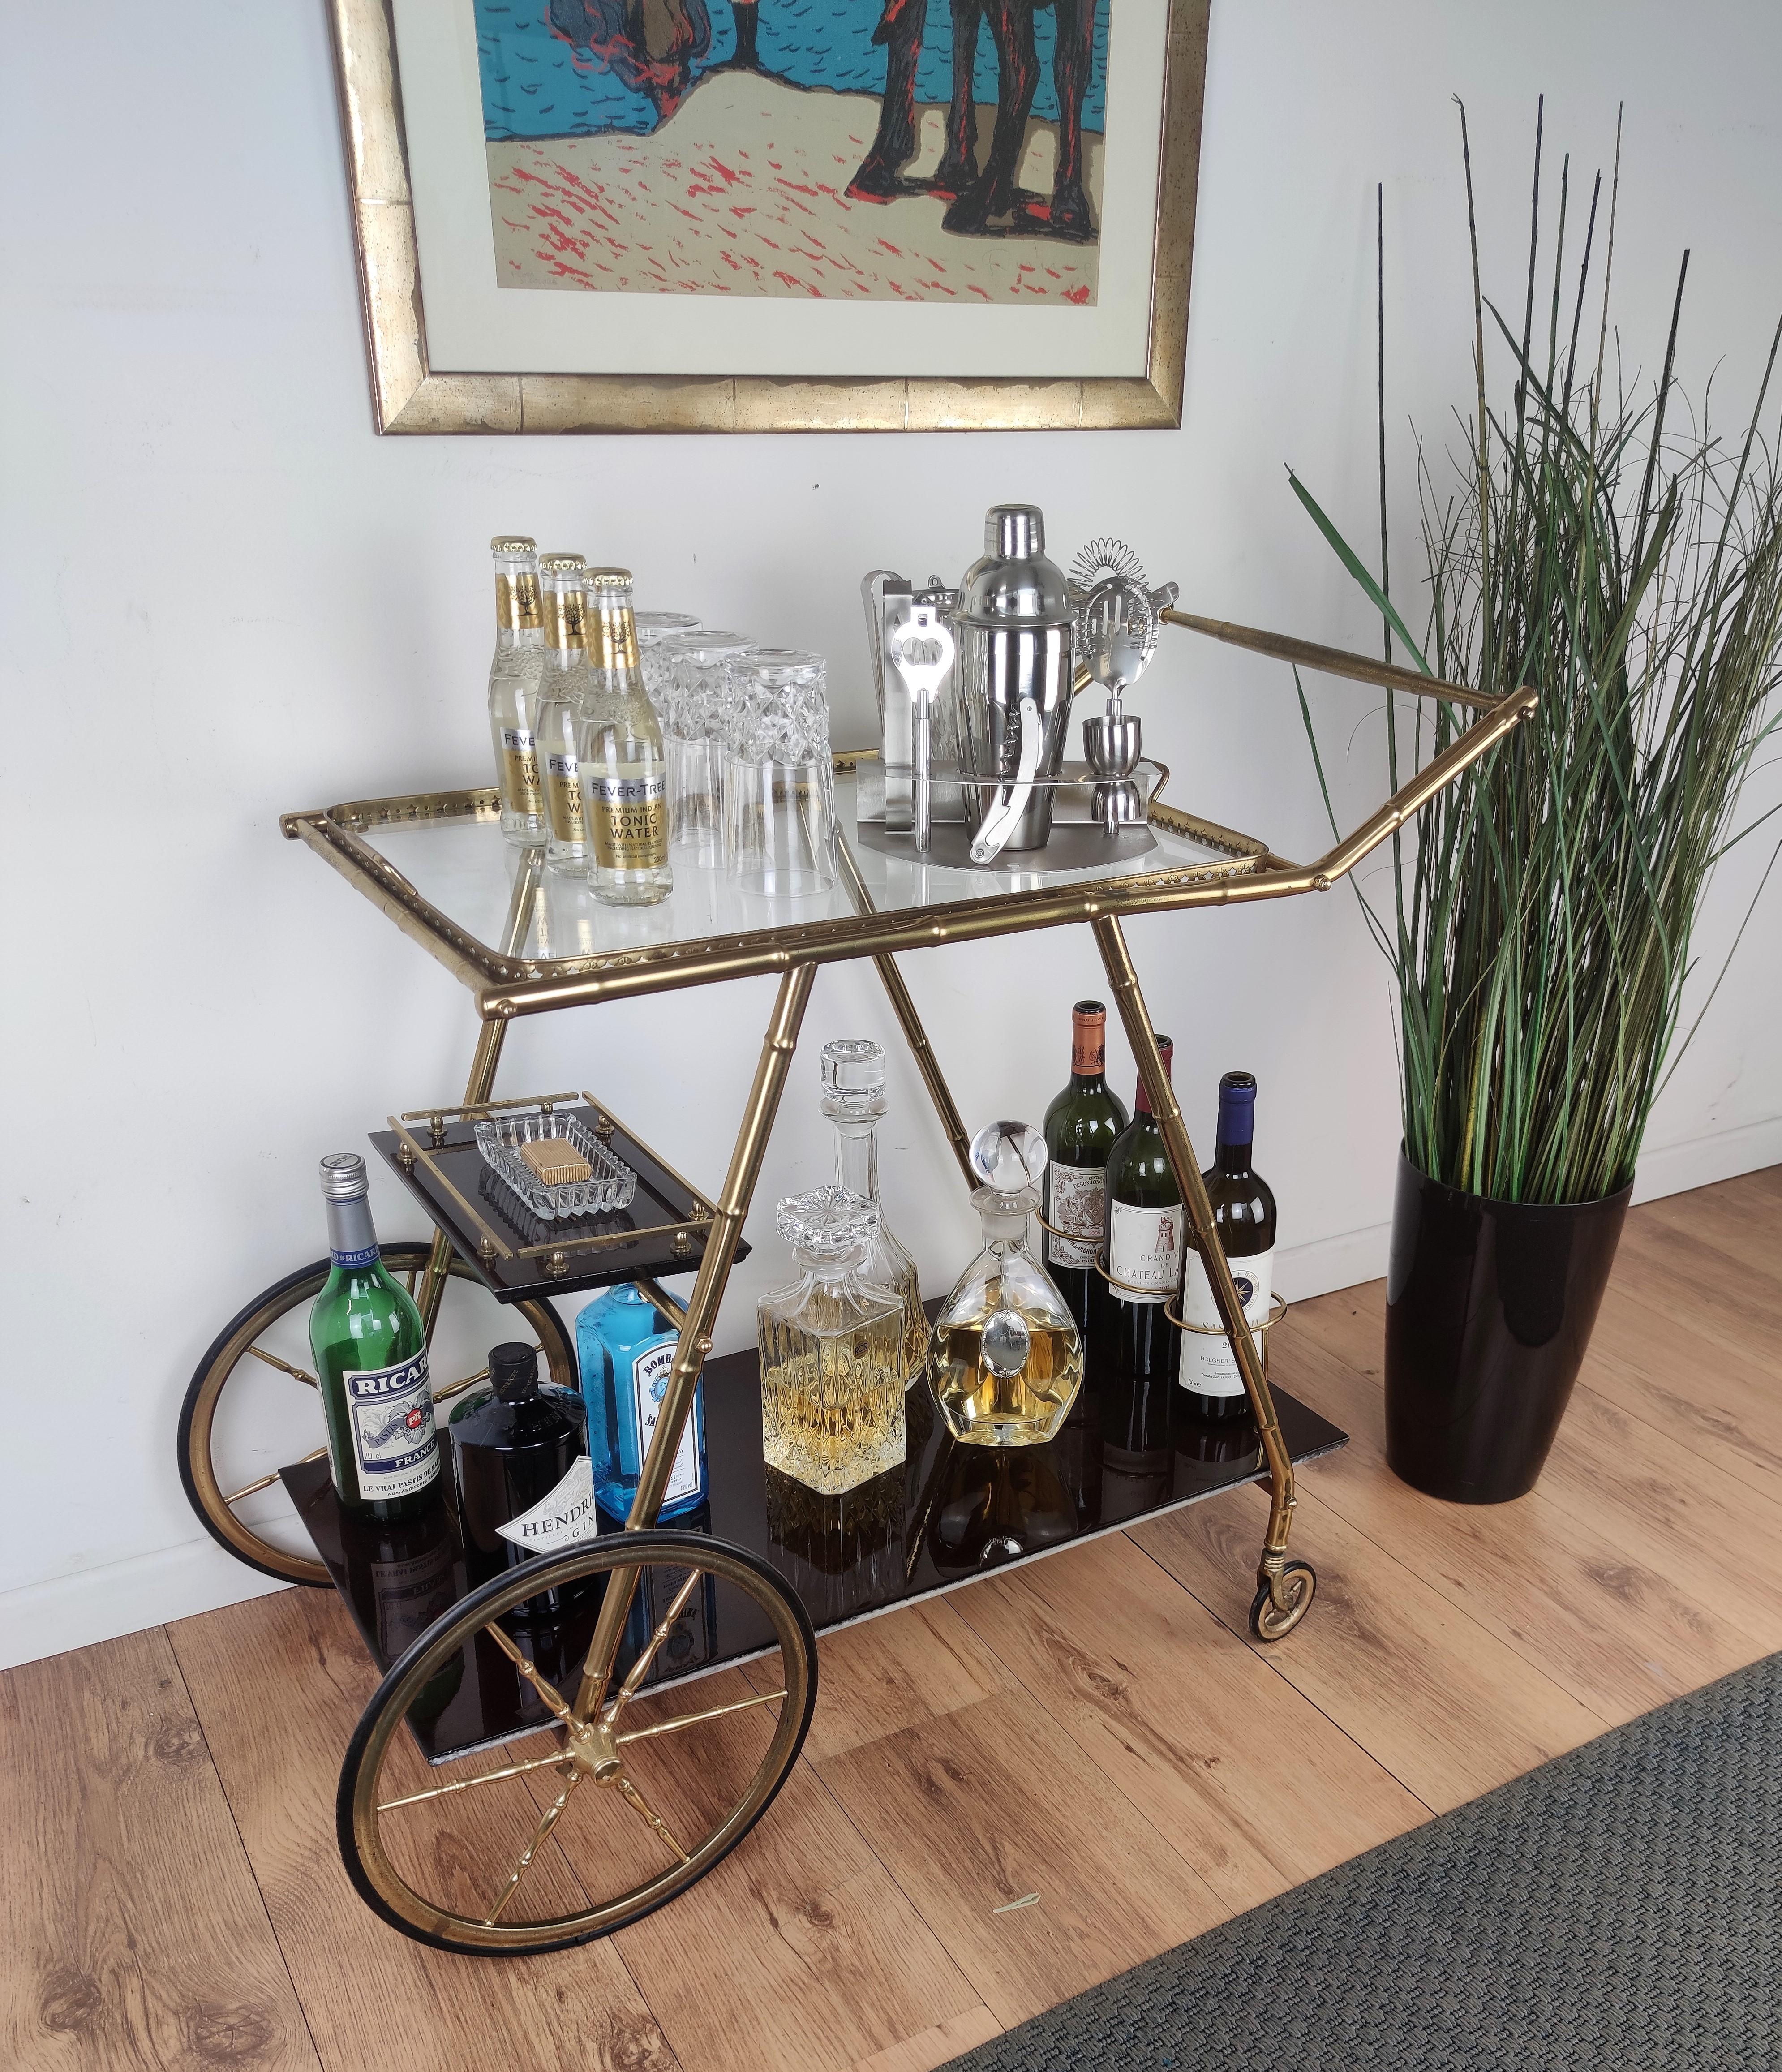 Beautiful and stylish vintage 1970s Italian two-tier brass and glass bar cart with removable top tray, great brass wheels and triple frame for bottle holder. Very good condition with minor wear on the cart and tray handles.

A great piece that